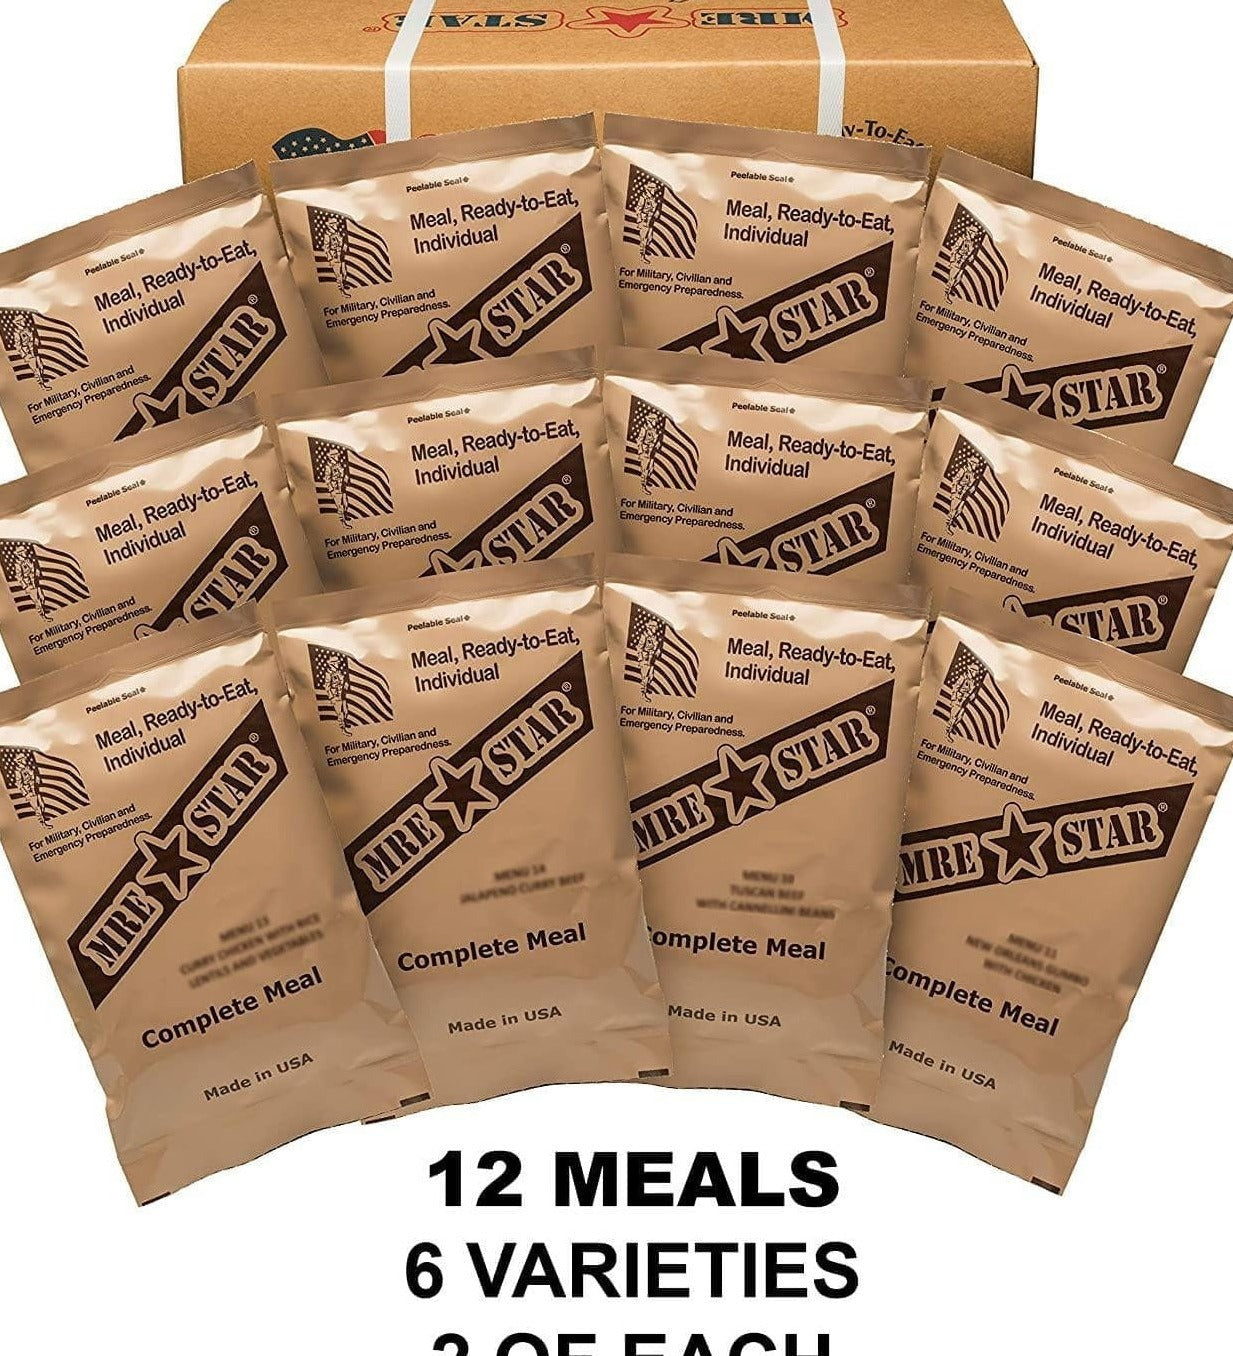 MRE Star Case of 12 MRE Star Standard Read to Eat Meal, Butter